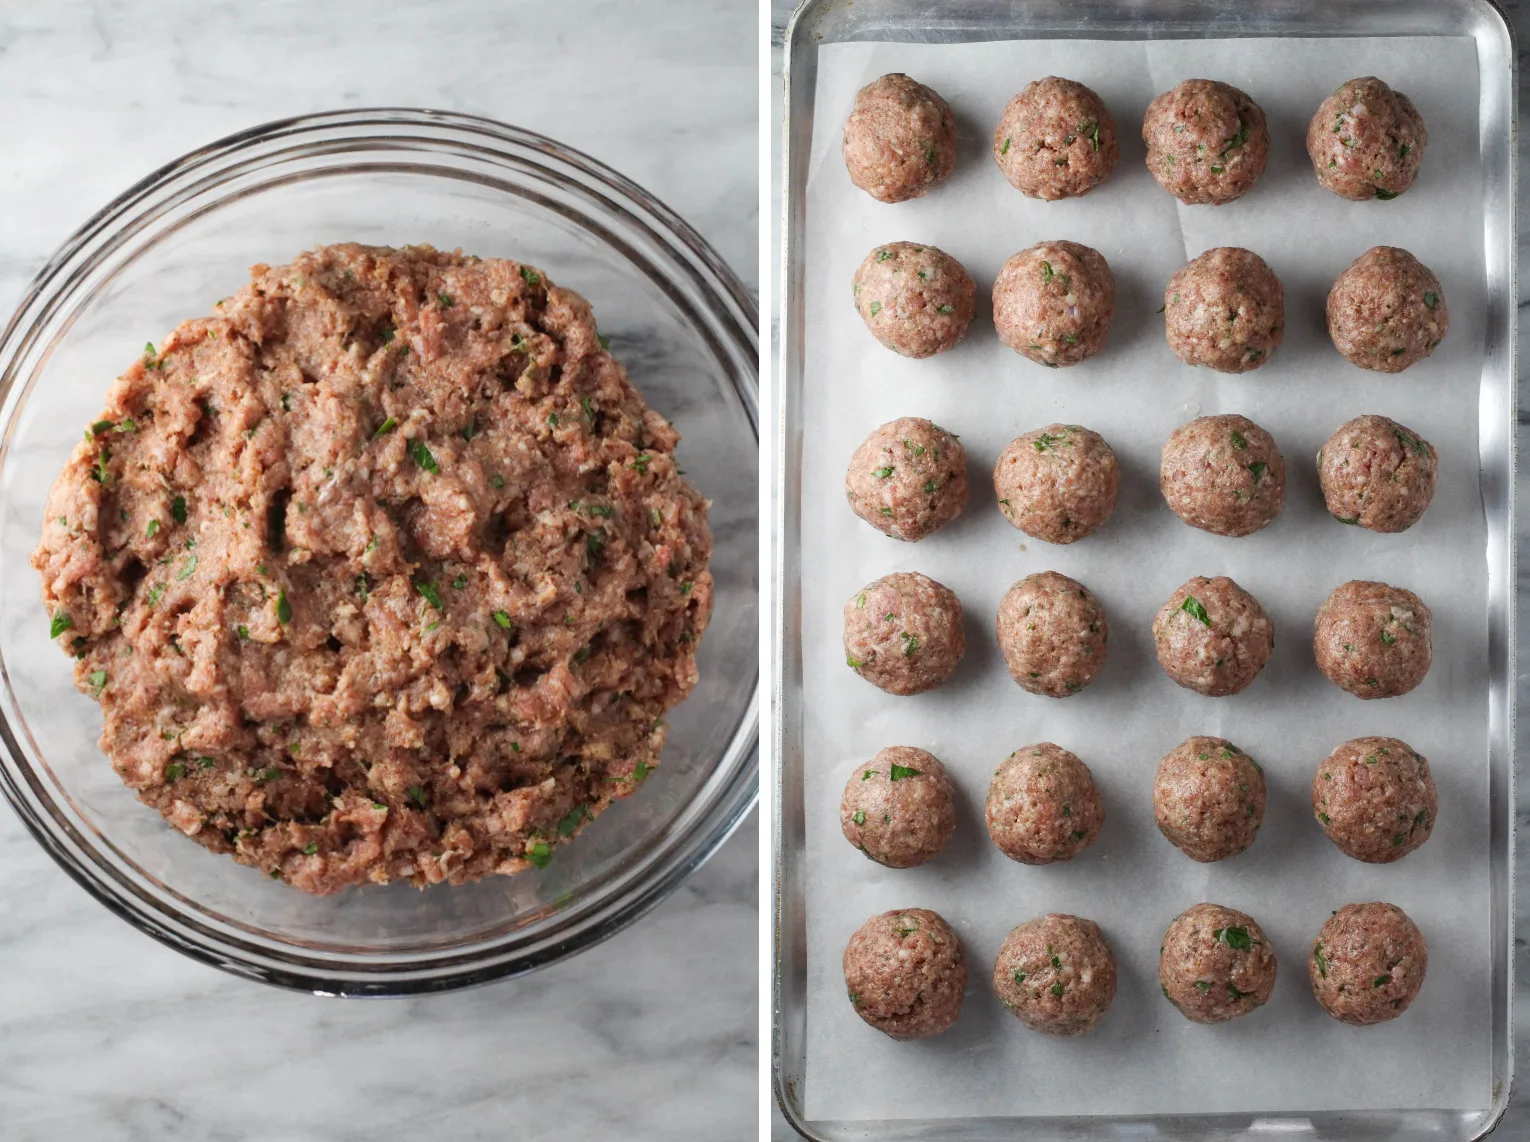 Two images side by side. The image on the left: meatball mixture in a glass bowl. The image on the right is meatballs on a baking sheet covered with parchement paper.